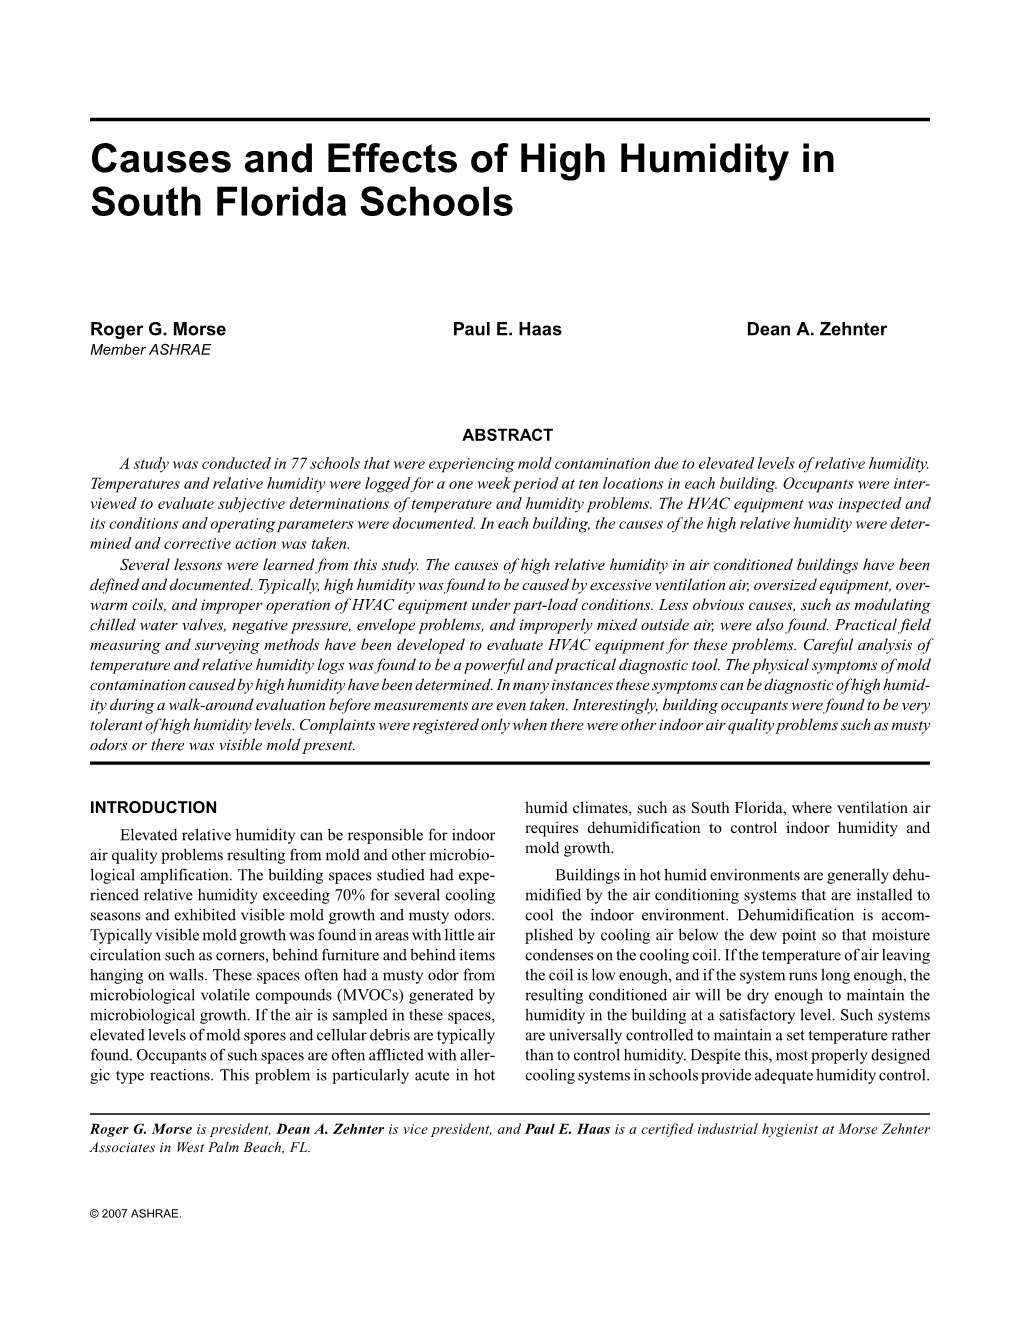 Causes and Effects of High Humidity in South Florida Schools